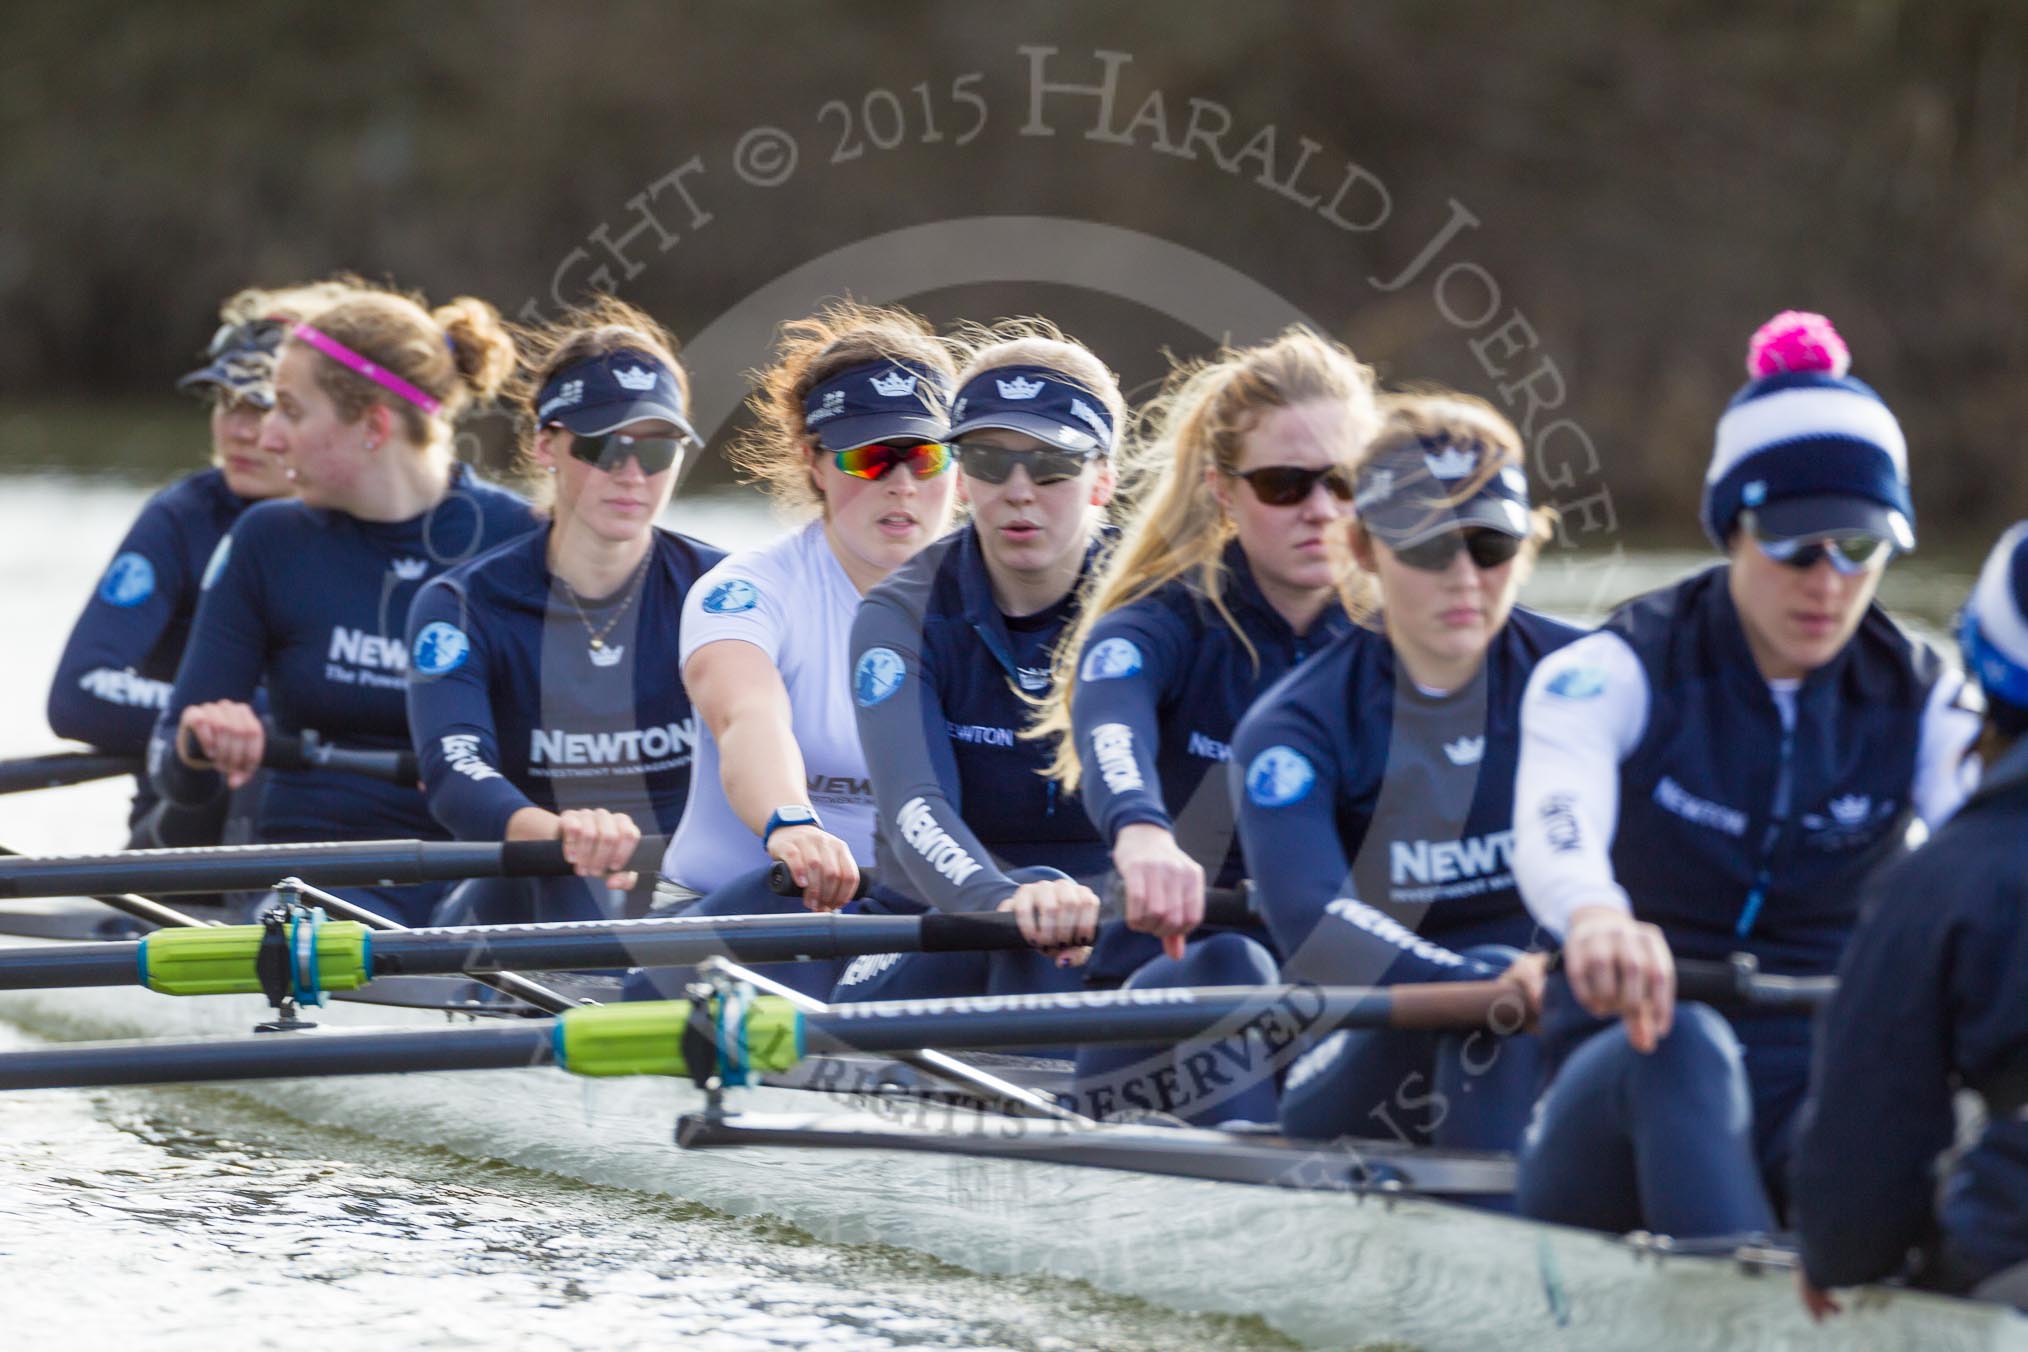 The Boat Race season 2015: OUWBC training Wallingford.

Wallingford,

United Kingdom,
on 04 March 2015 at 15:38, image #34